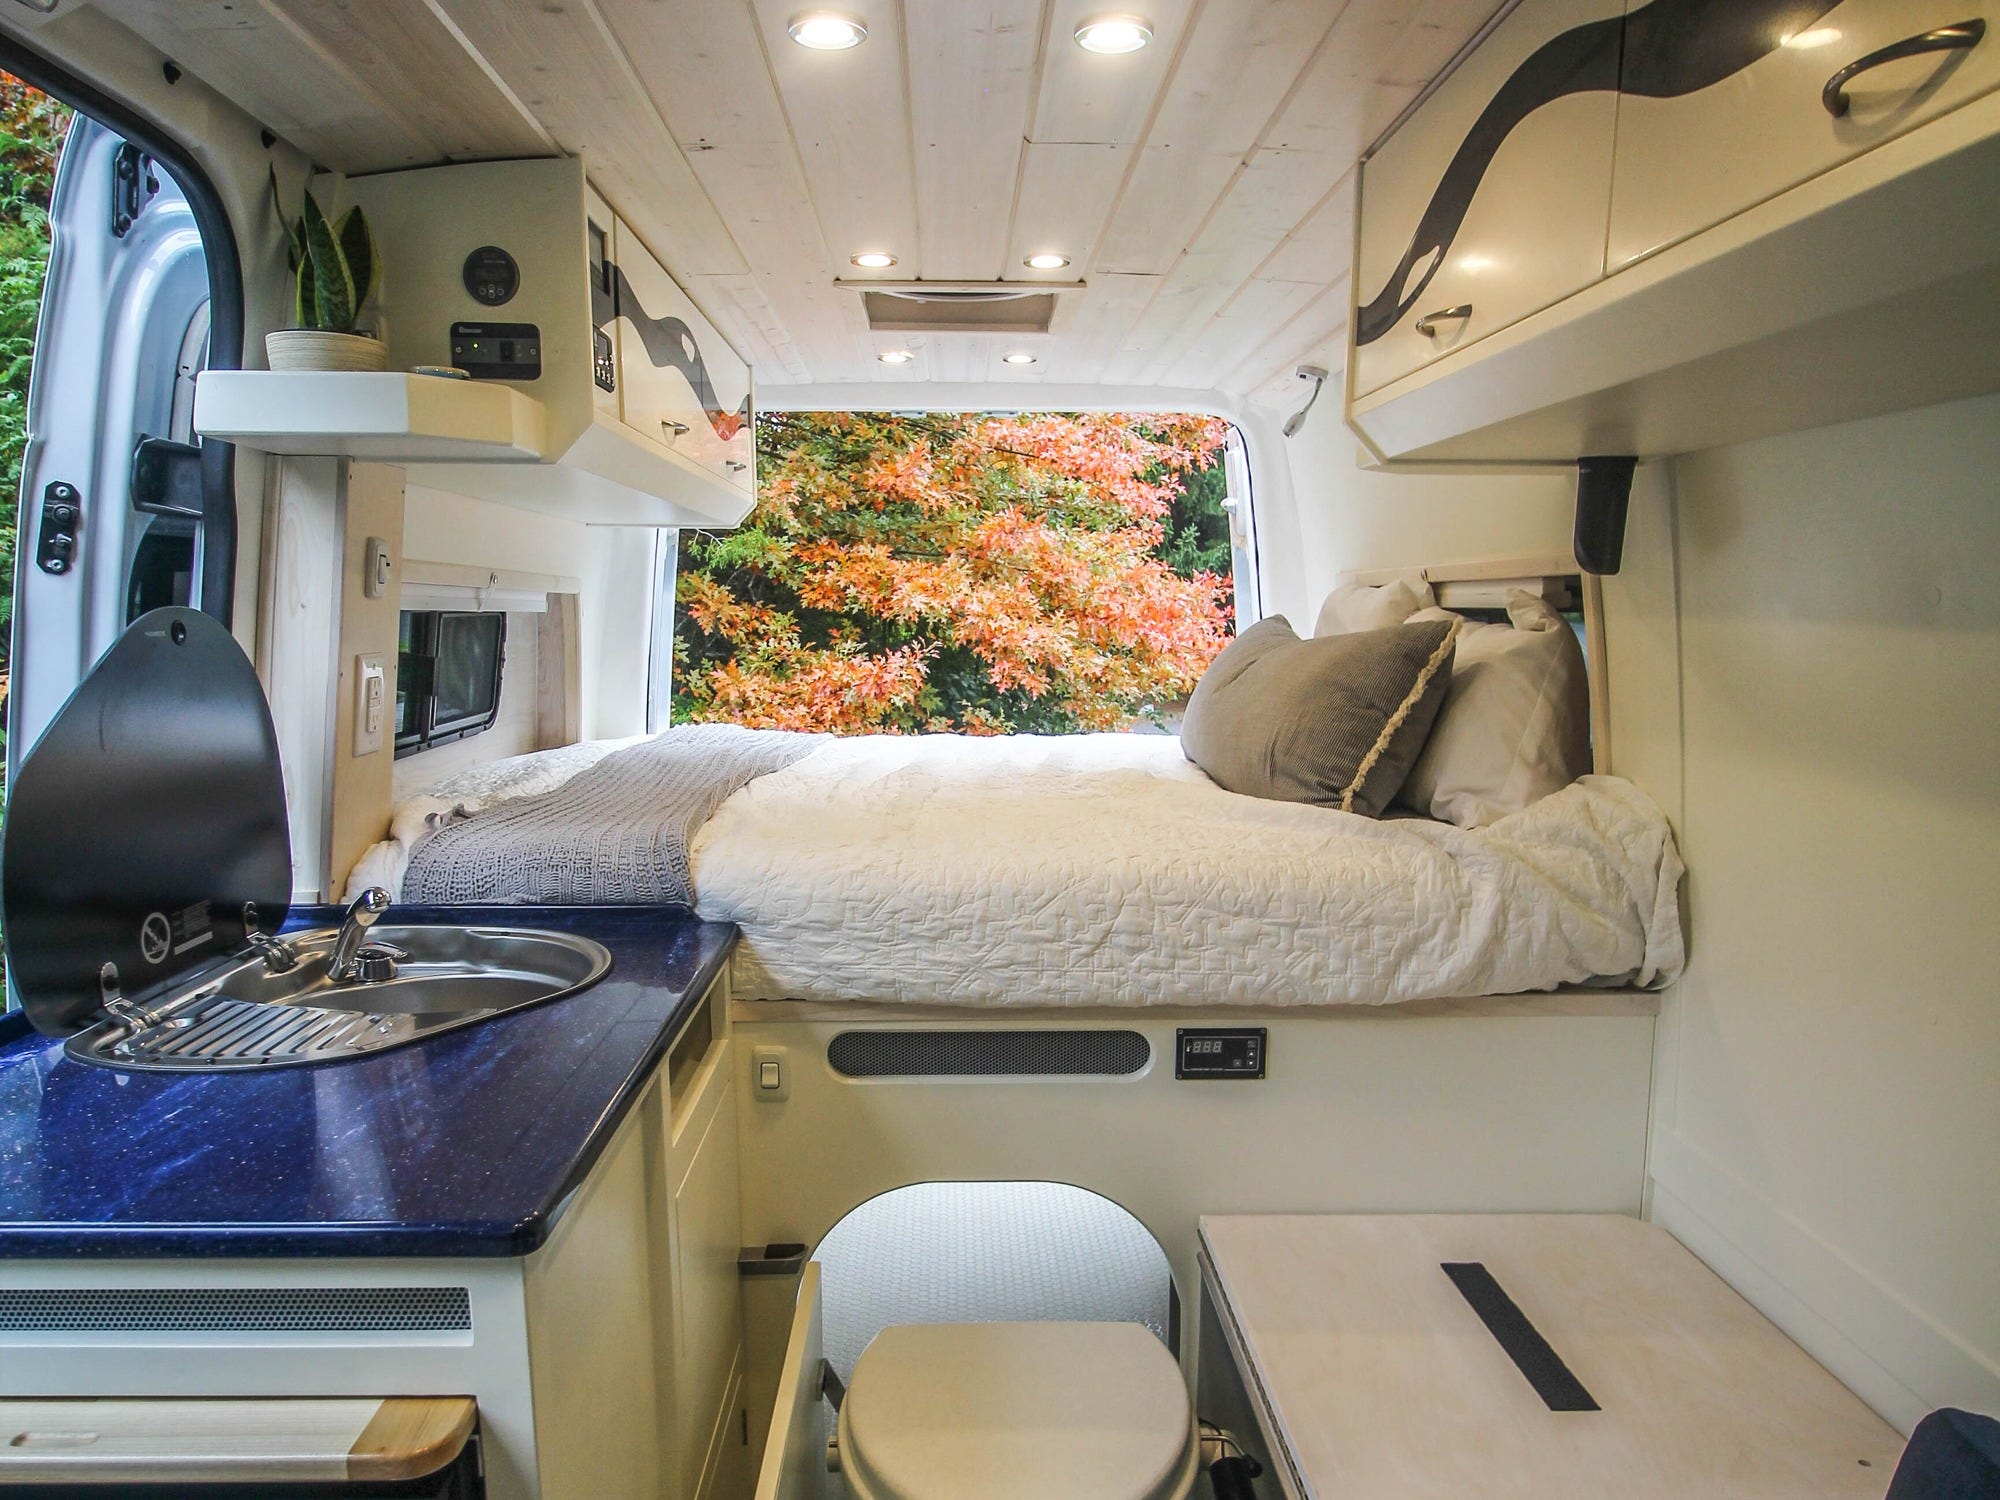 Converted camper vans can cost as much as 250,000 — take a look at 6